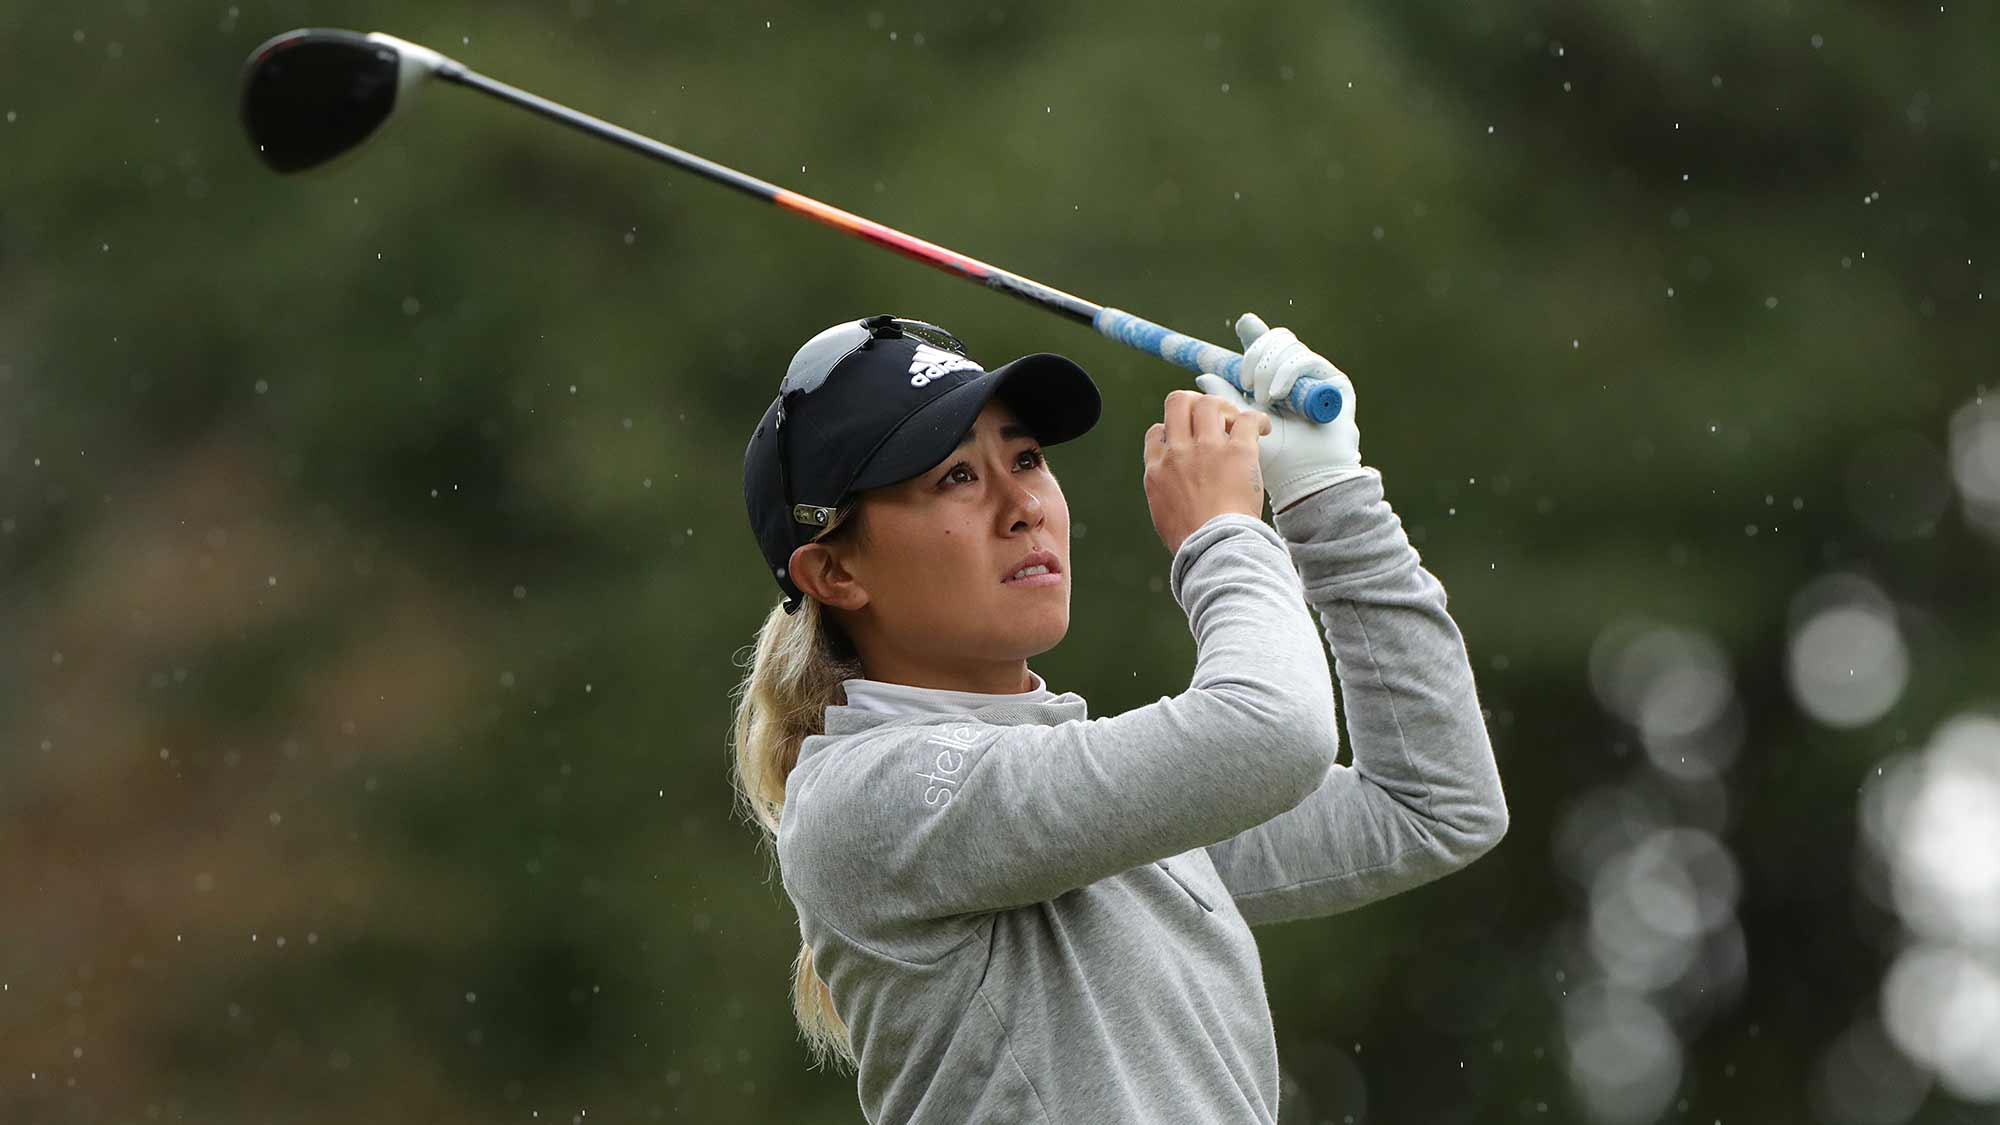 Danielle Kang of USA drives from a tee on the second hole during Round 1 of 2019 BMW Ladies Championship at LPGA International Busan at on October 24, 2019 in Busan, Republic of Korea